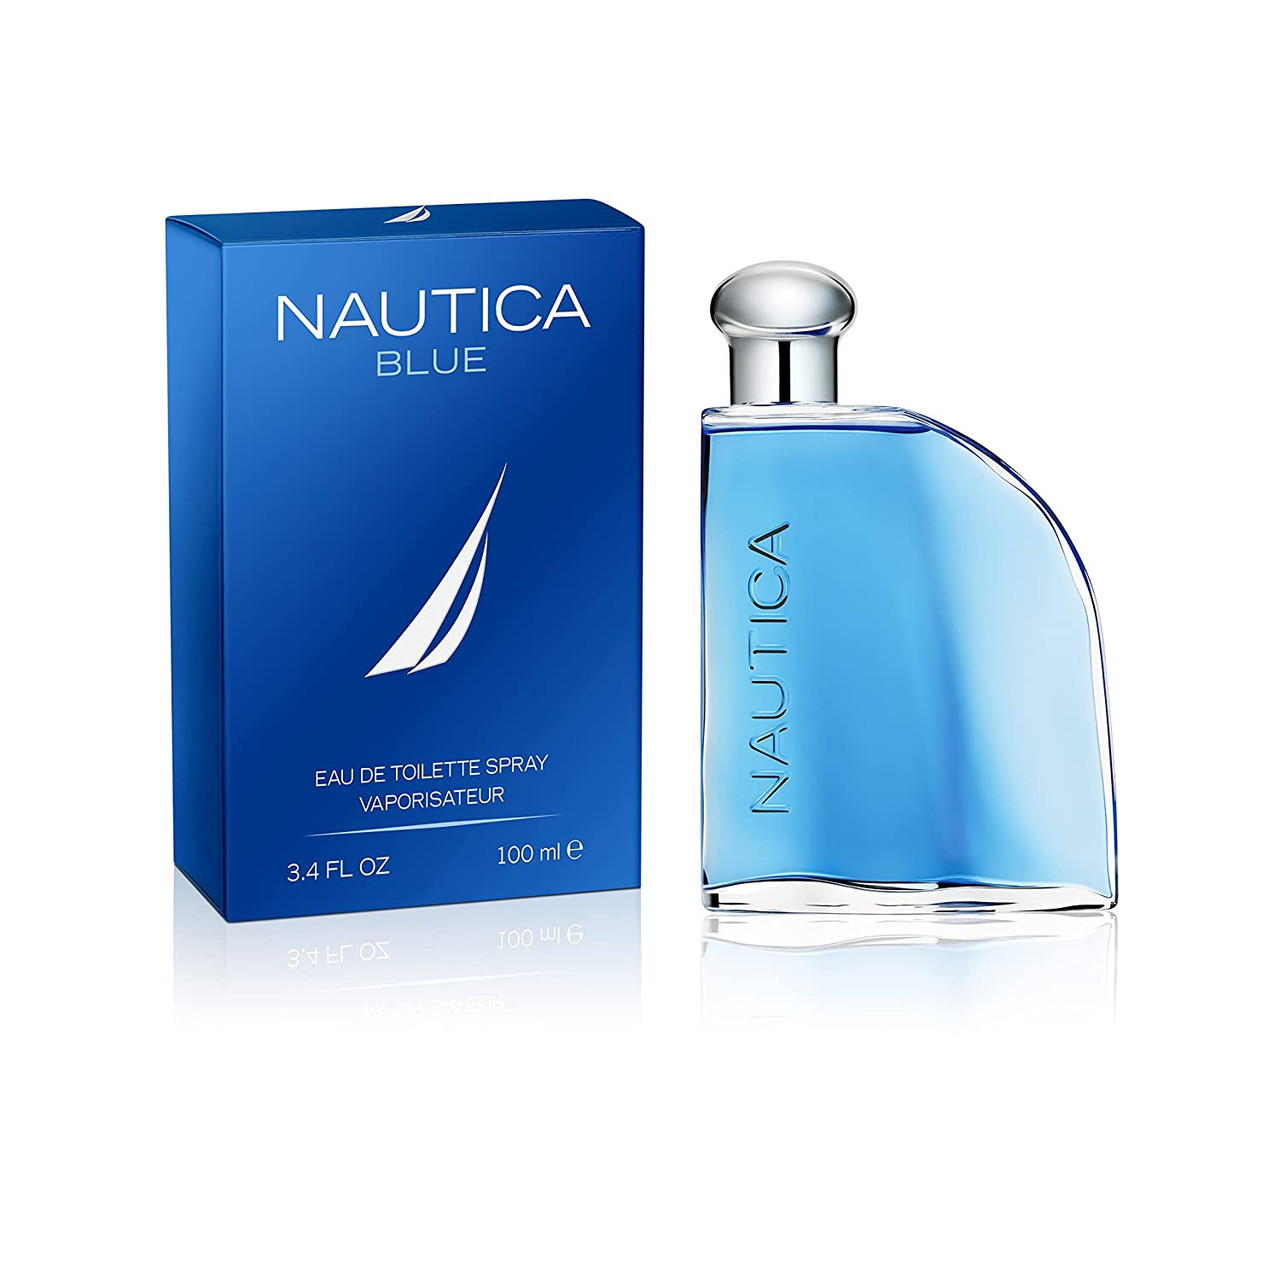 Nautica Voyage Eau De Toilette for Men - Fresh, Romantic, Fruity Scent  Woody, Aquatic Notes of Apple, Water Lotus, Cedarwood, and Musk Ideal Day  Wear